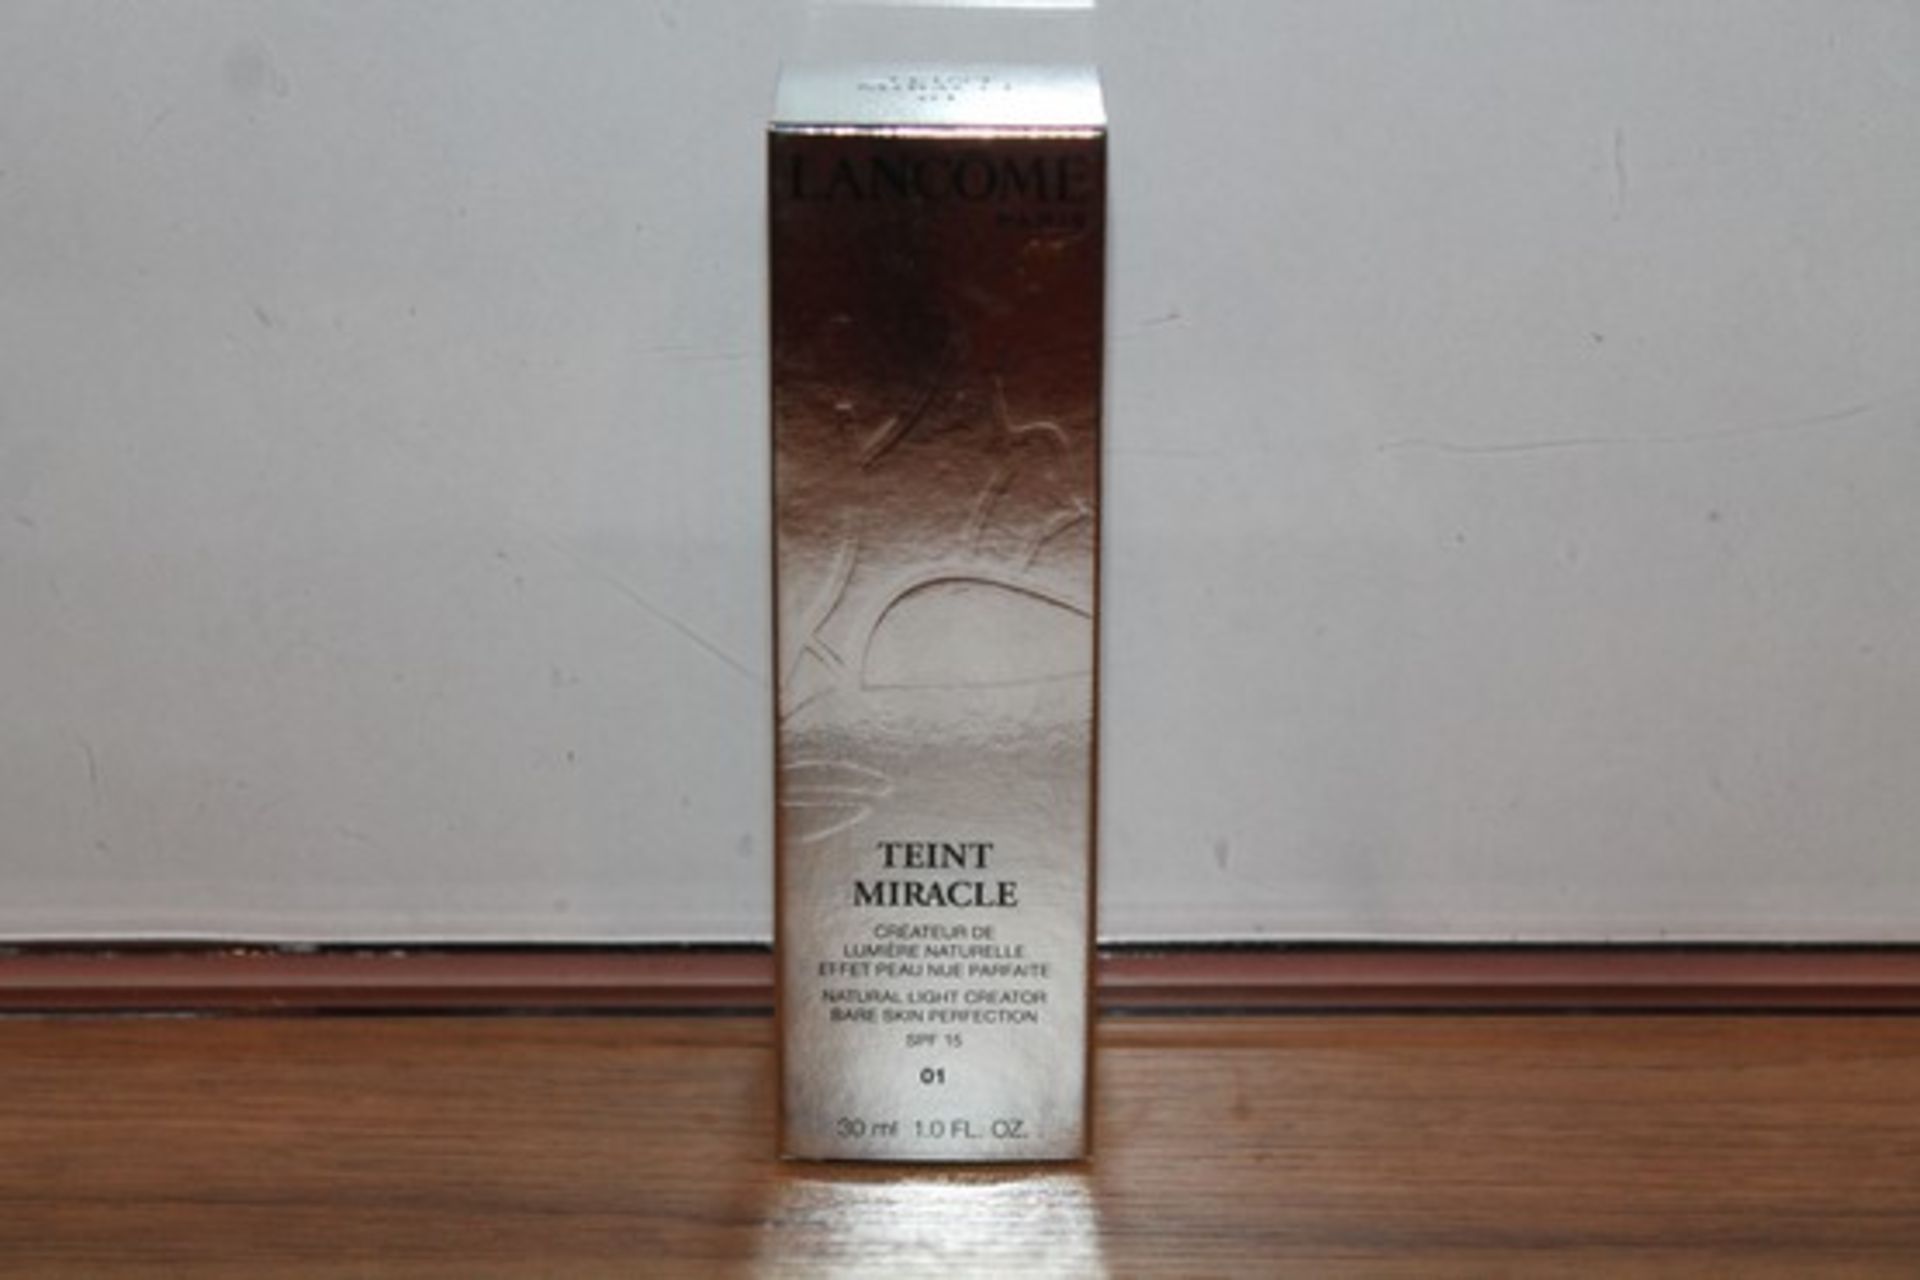 BOXED BRAND NEW FACTORY SEALED LANCOME PARIS TEINT BARE MIRACLE, BARE SKIN PROTECTION, SPF 15 03,